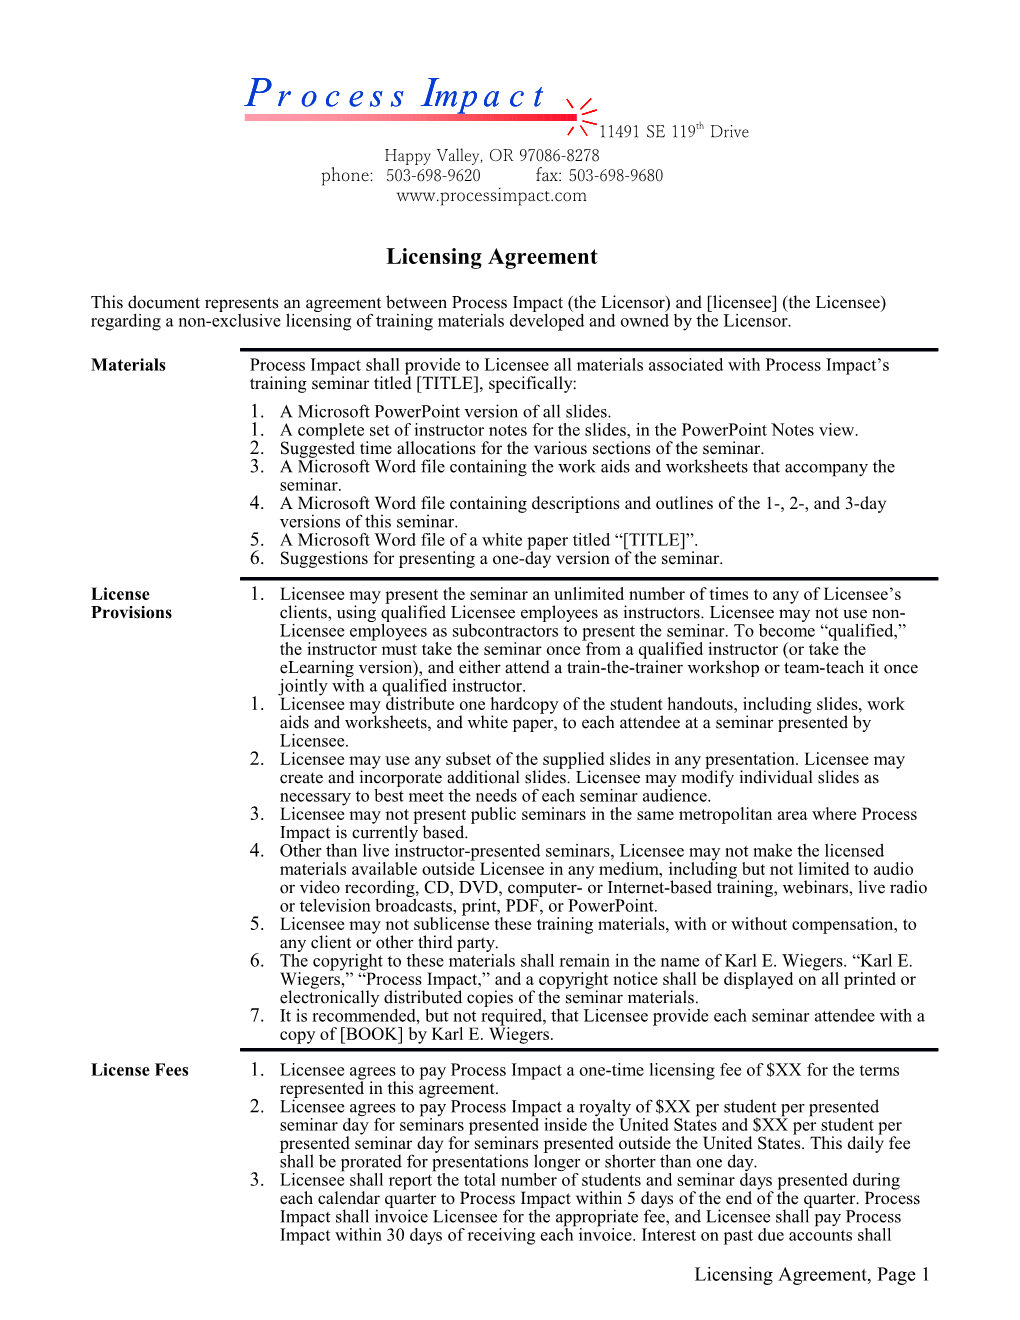 This Document Represents an Agreement Between Process Impact (The Licensor) and Licensee